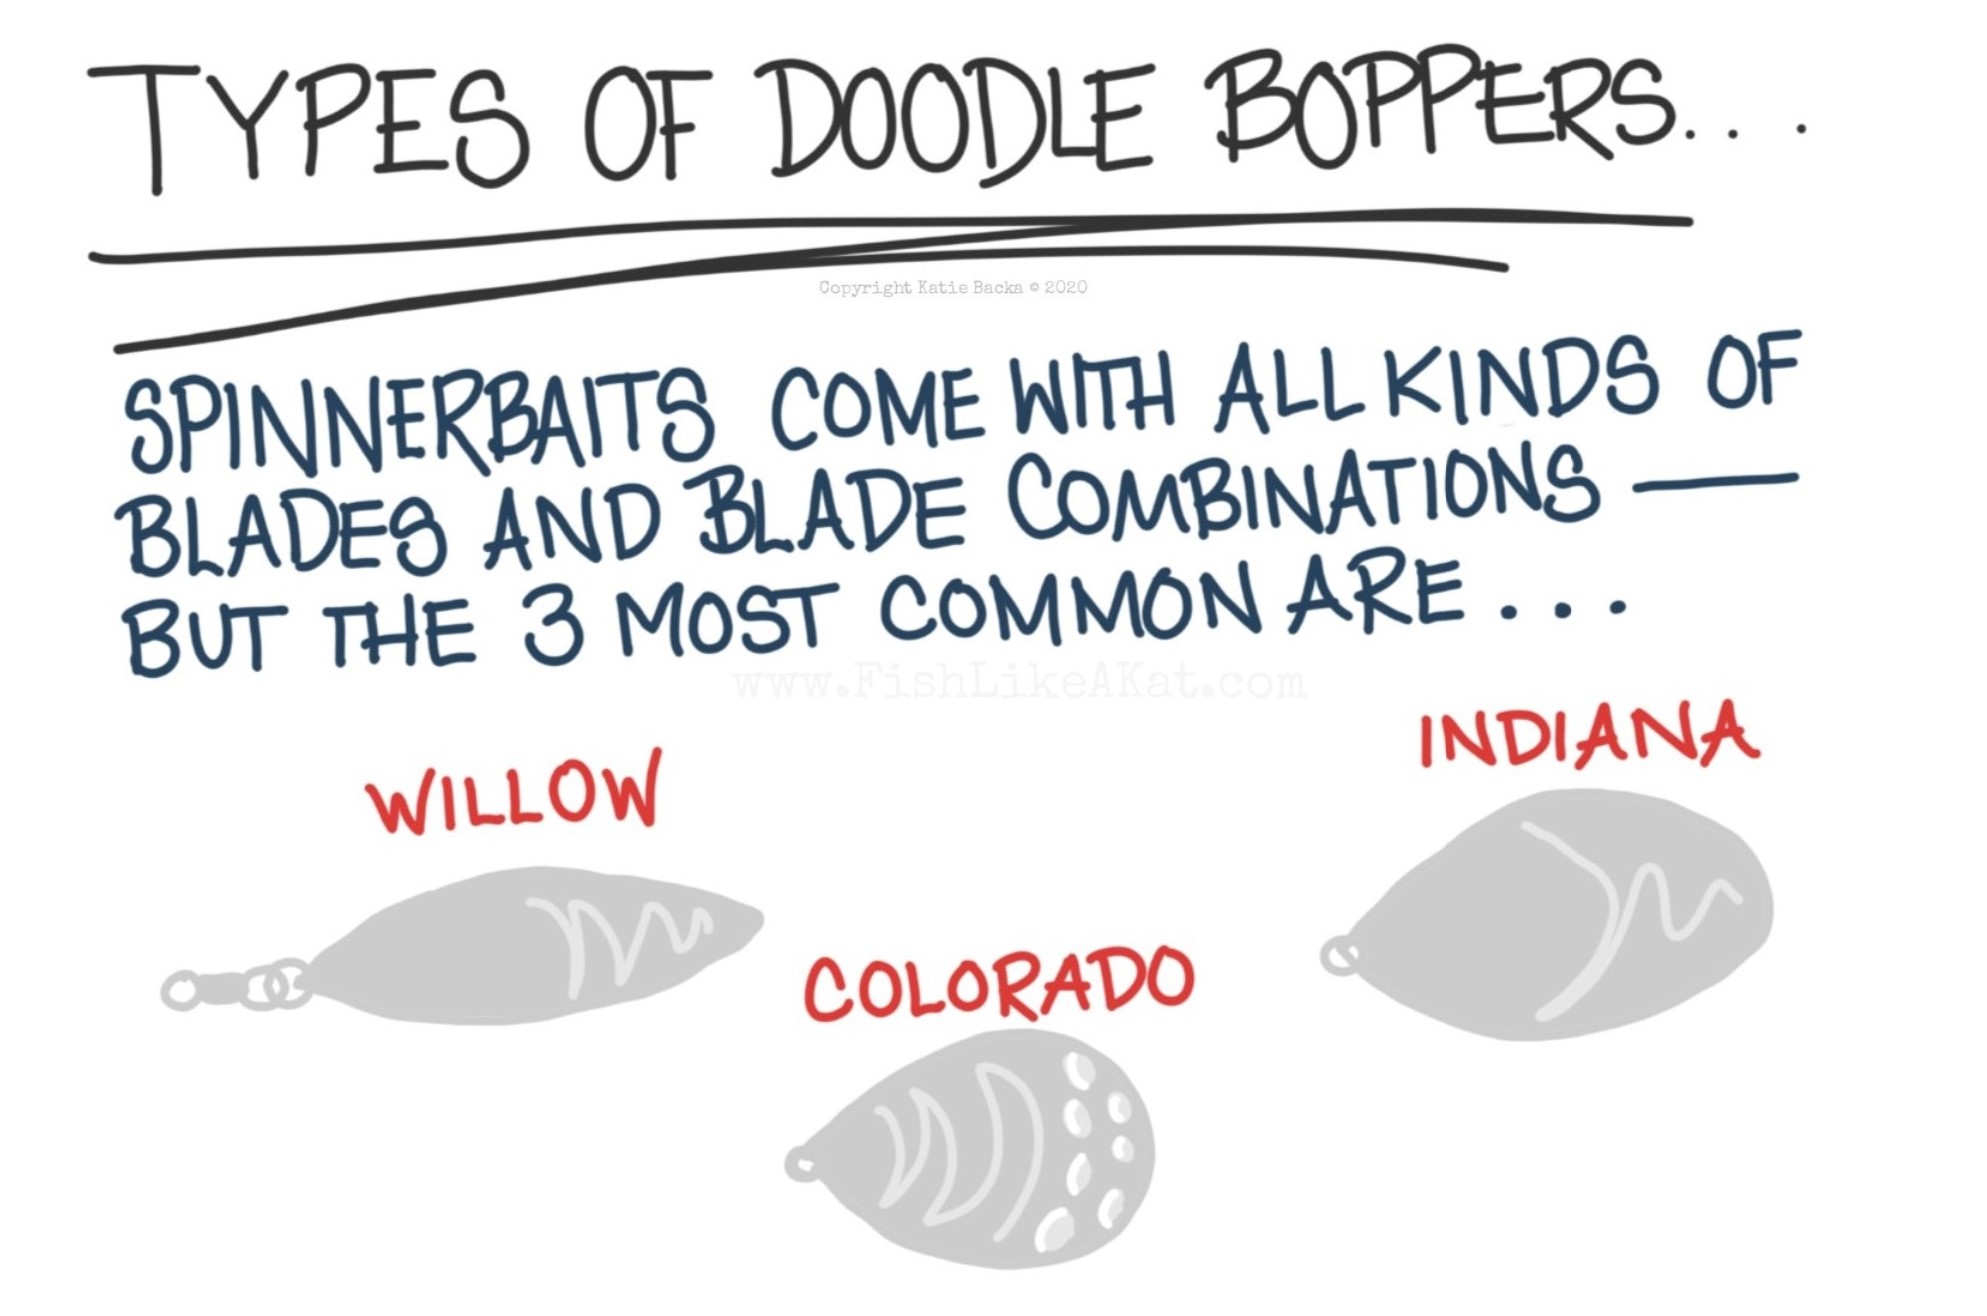 text: Types of doodle boppers. Spinnerbaits come with all kinds of blades and blade combinations, but the 3 most common are willow, Colorado, Indiana. With illustrations of each type of blade.